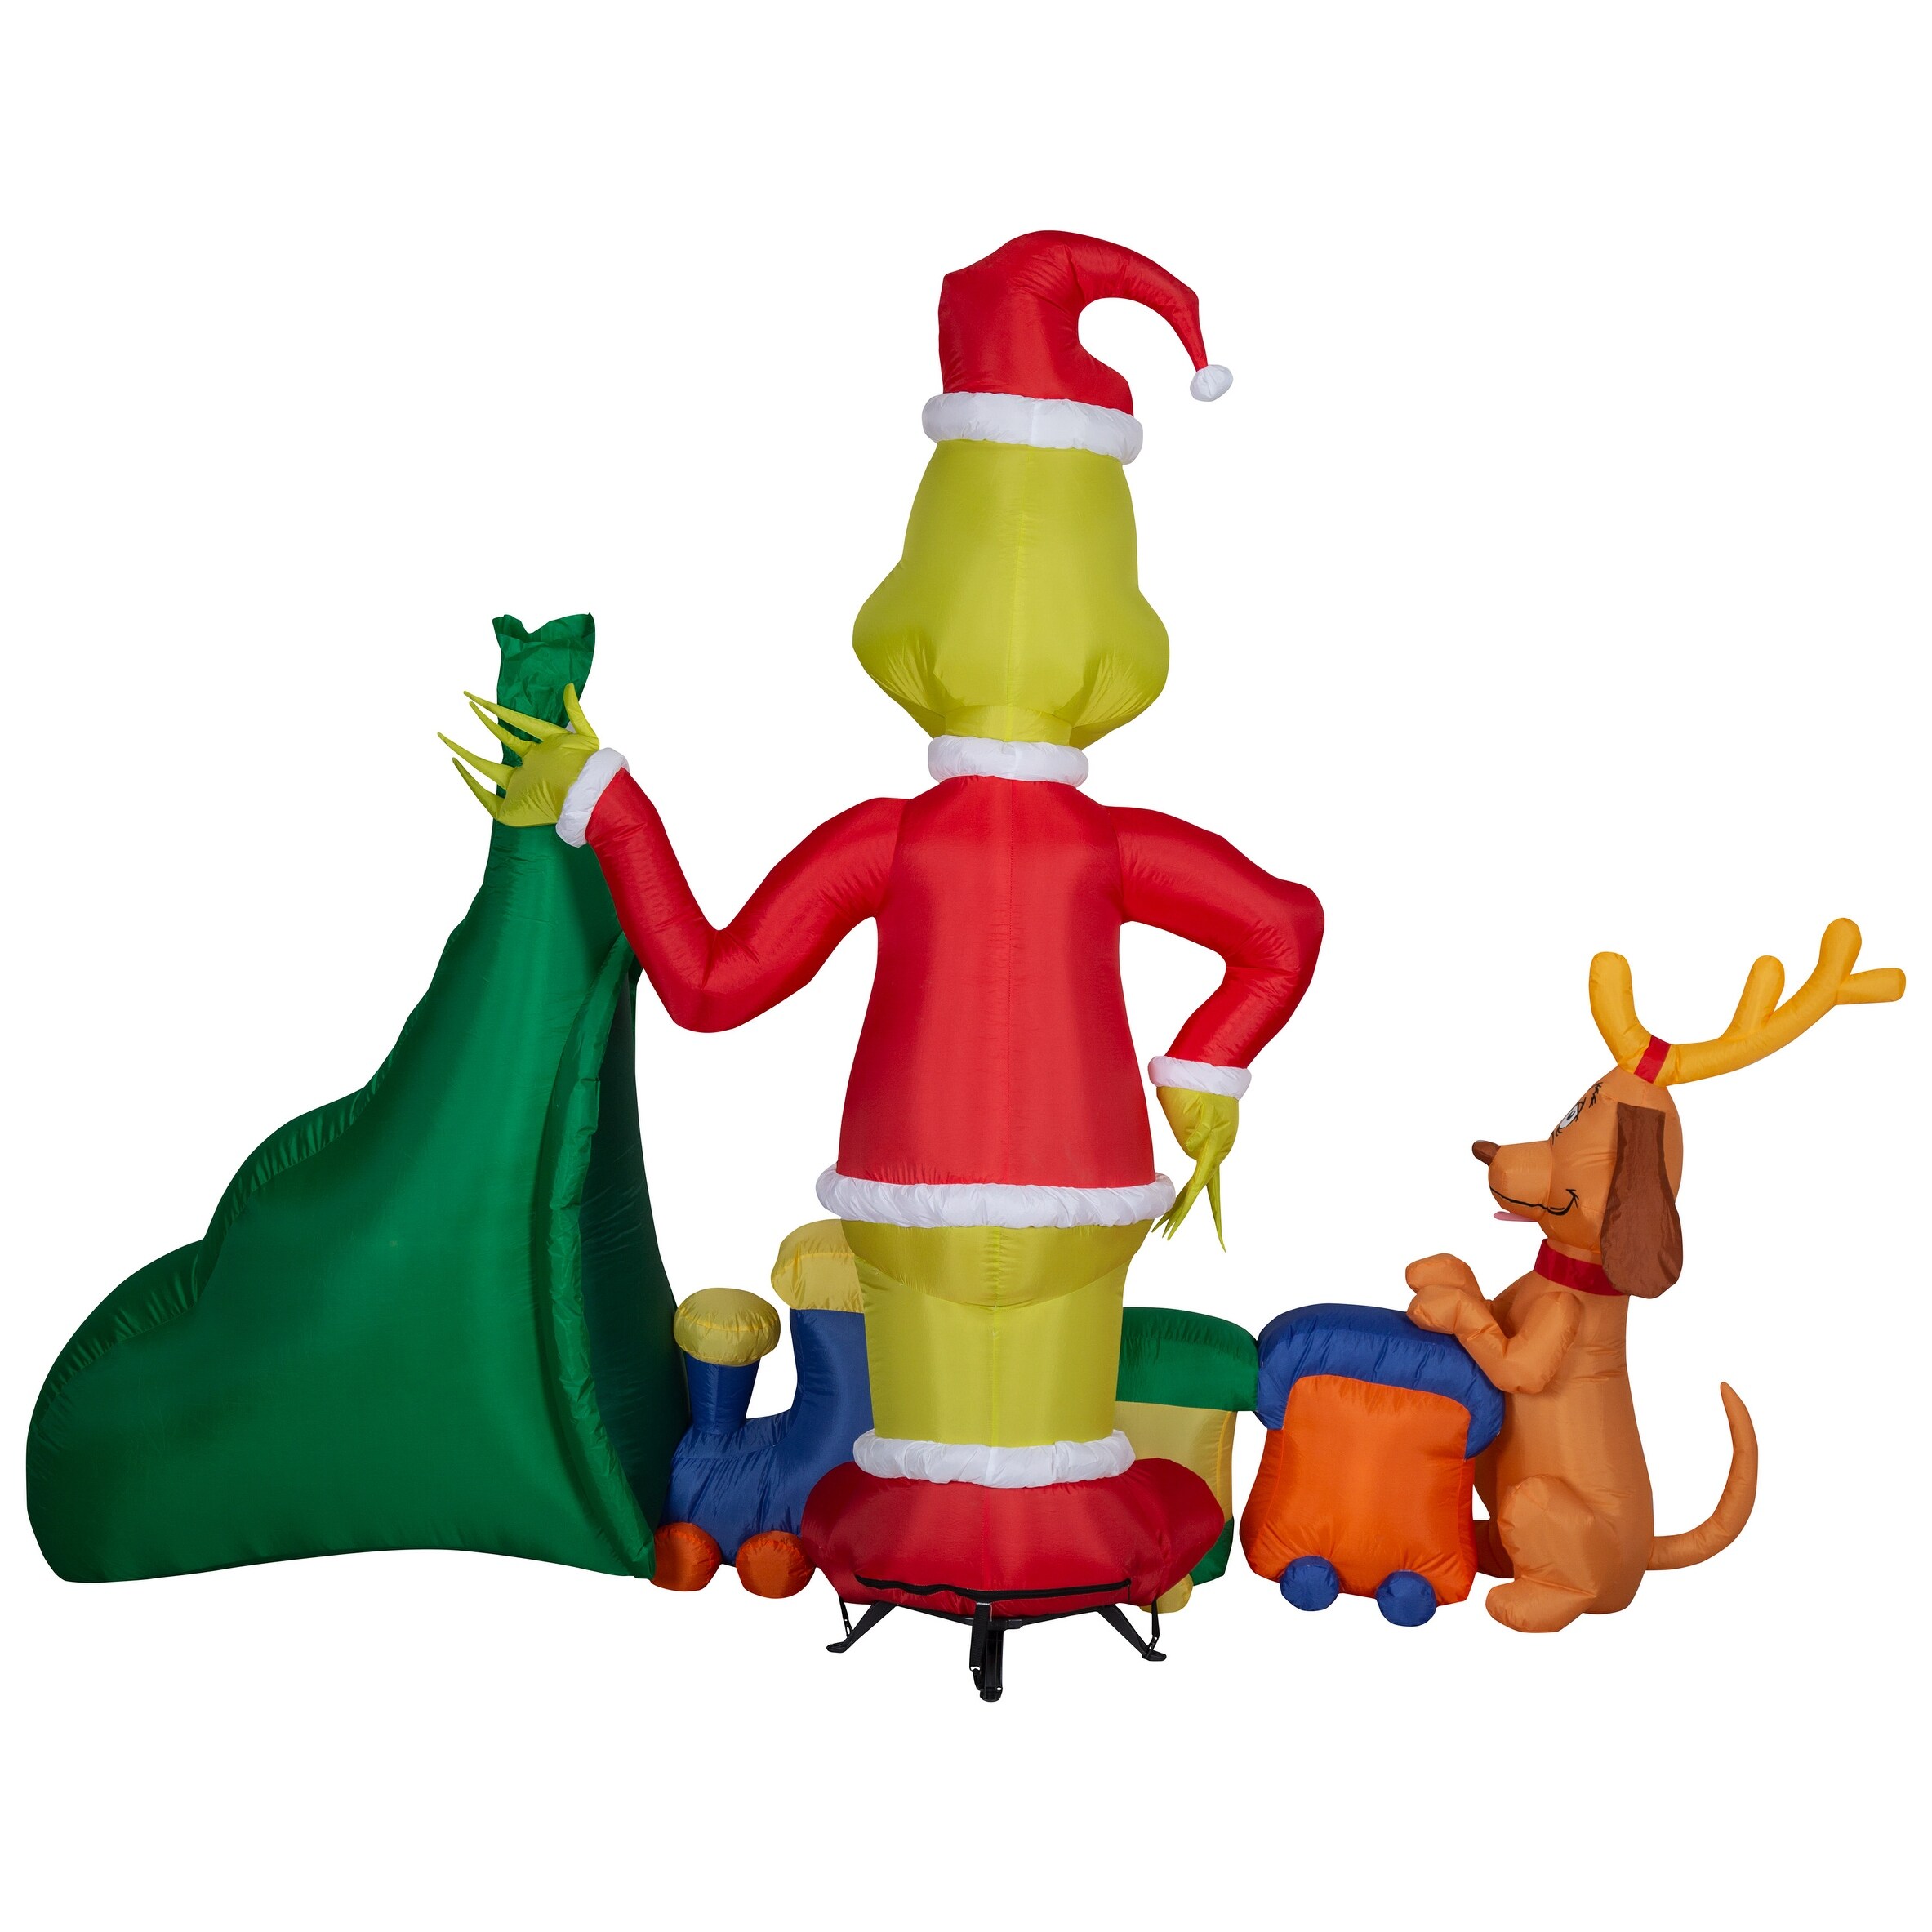 https://ak1.ostkcdn.com/images/products/is/images/direct/c693729e671d47a4987d9ca8b18257464623a070/Gemmy-Christmas-Airblown-Inflatable-Grinch-Putting-Train-in-Santa-Sack-Scene-Dr.-Seuss%2C-6.5-ft-Tall.jpg